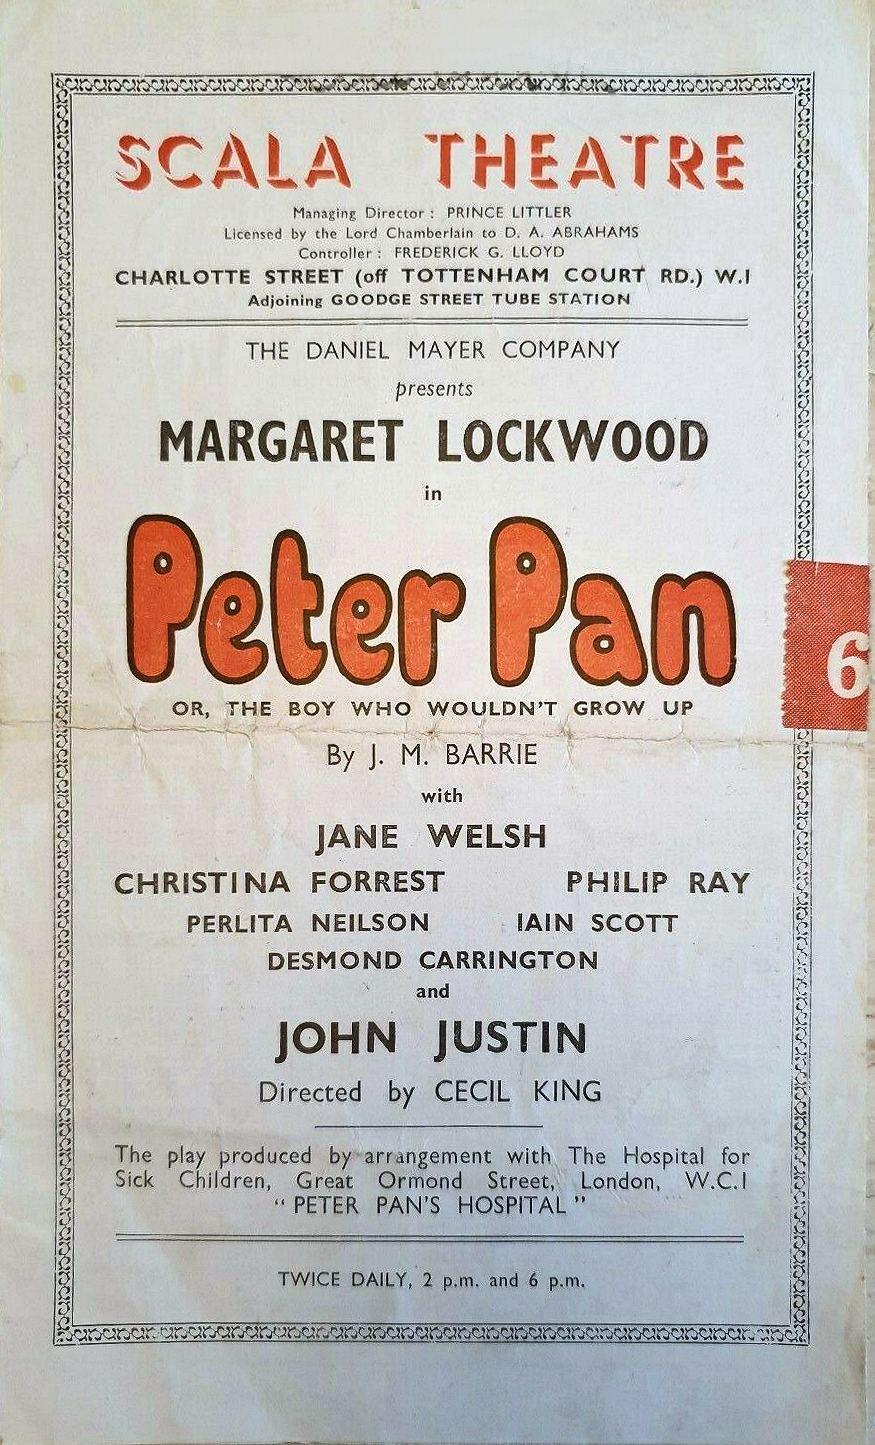 Programme from Peter Pan, performed at the Scala Theatre, London, in 1949